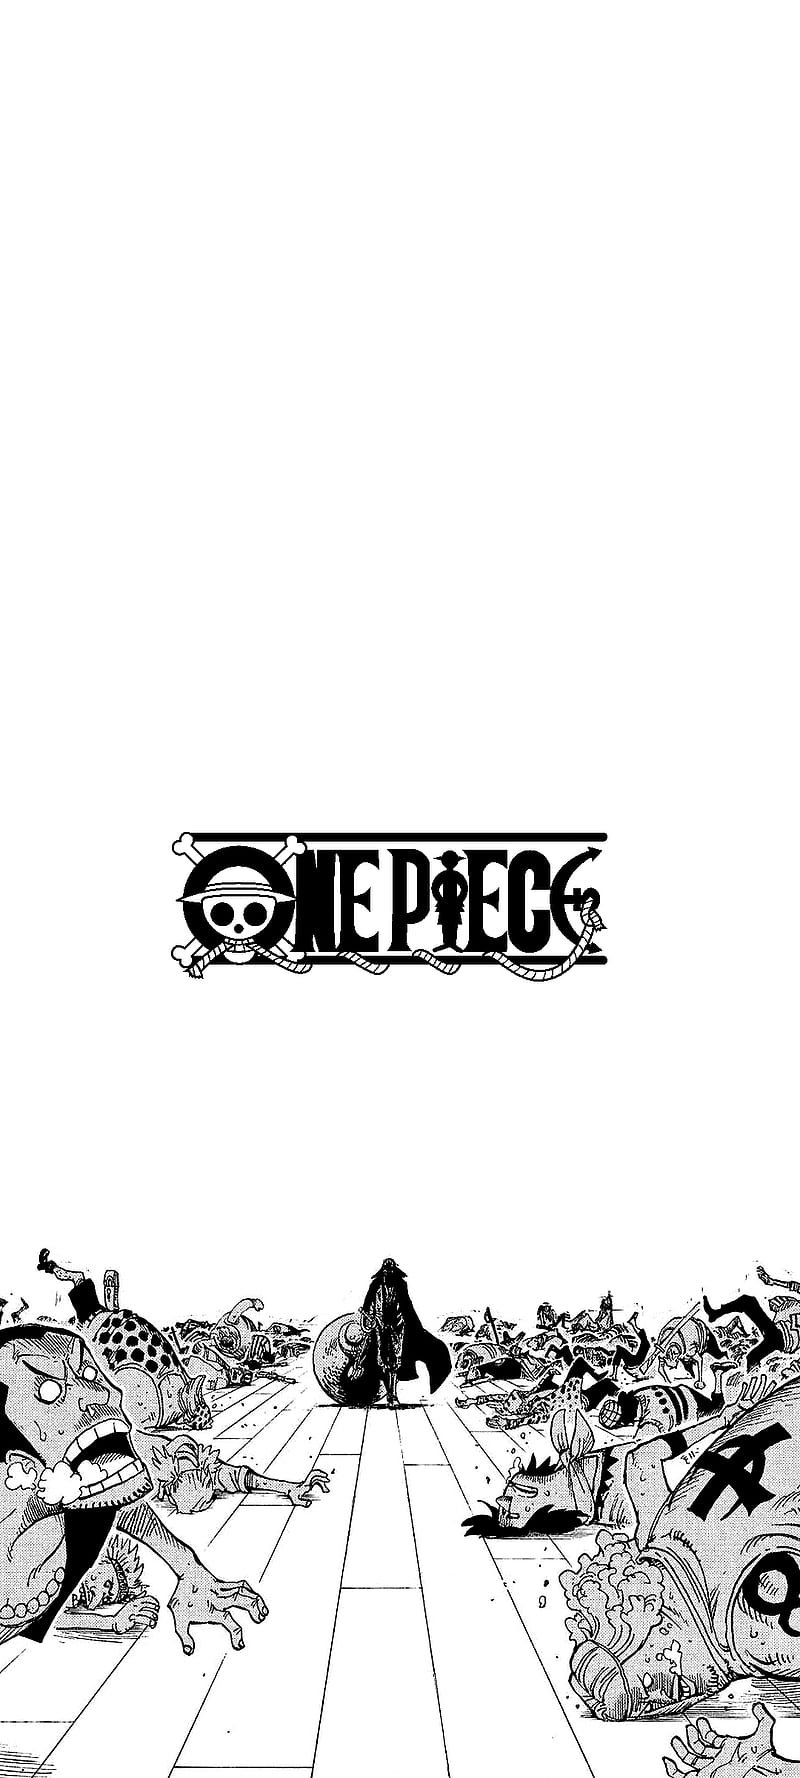 My Strawhats pc wallpaper :D : r/OnePiece